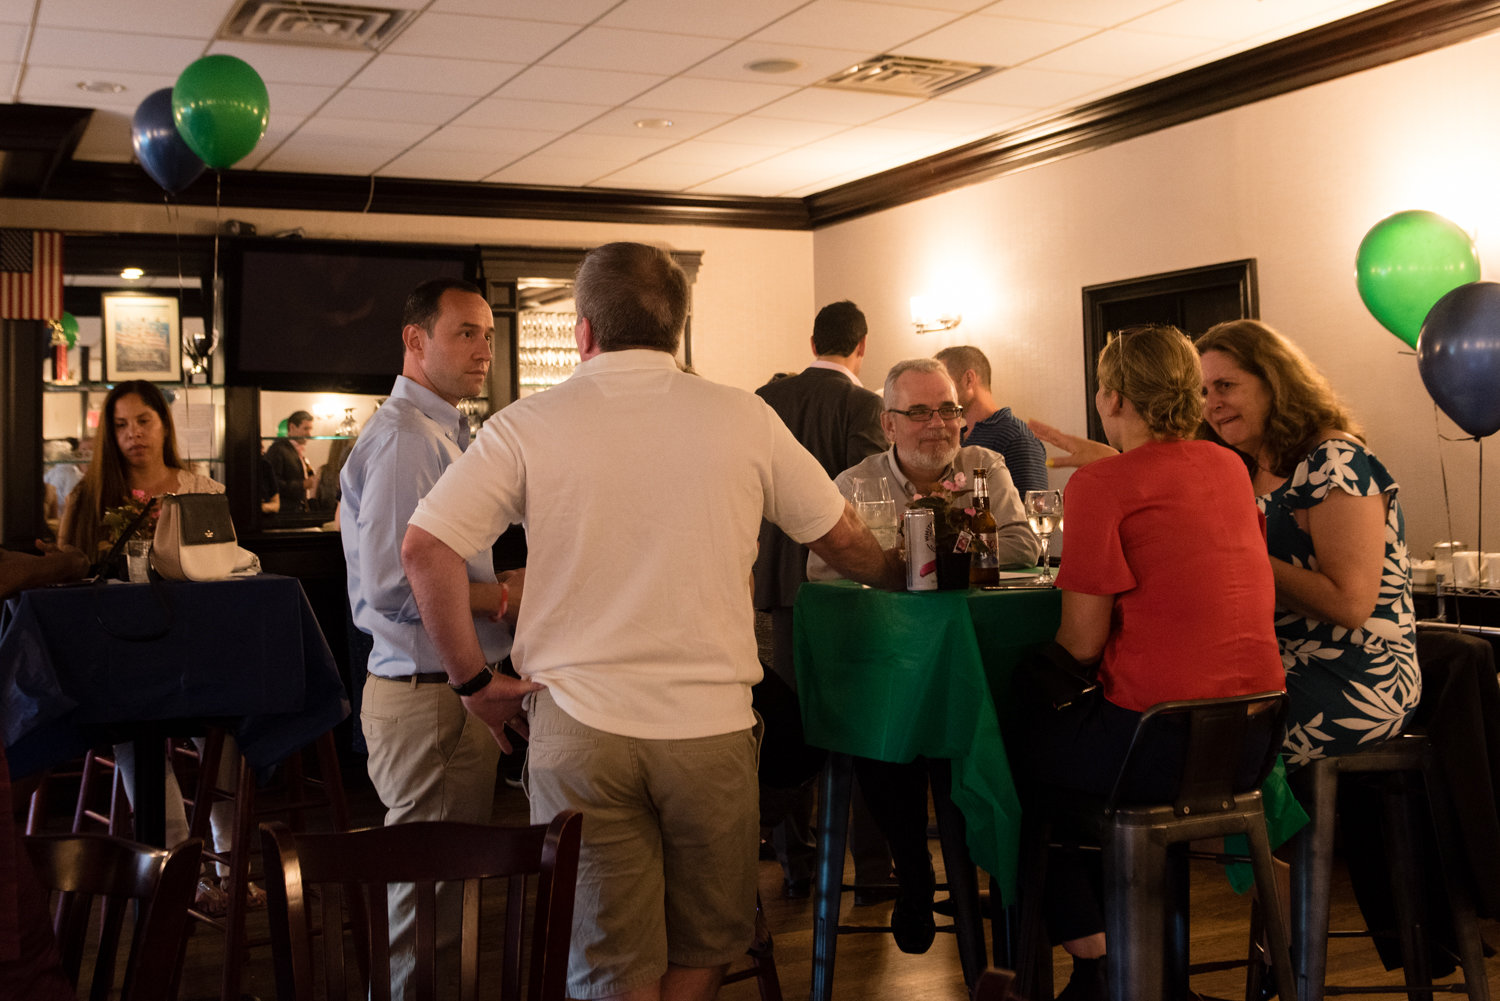 City council candidate Dan Padernacht, center left, chats with supporters during a fundraising event for his campaign at Downey’s Bar & Grill. Padernacht hopes to claim the seat currently occupied by Councilman Andrew Cohen, and a matching public funds program for political candidates may help him get there in 2021.